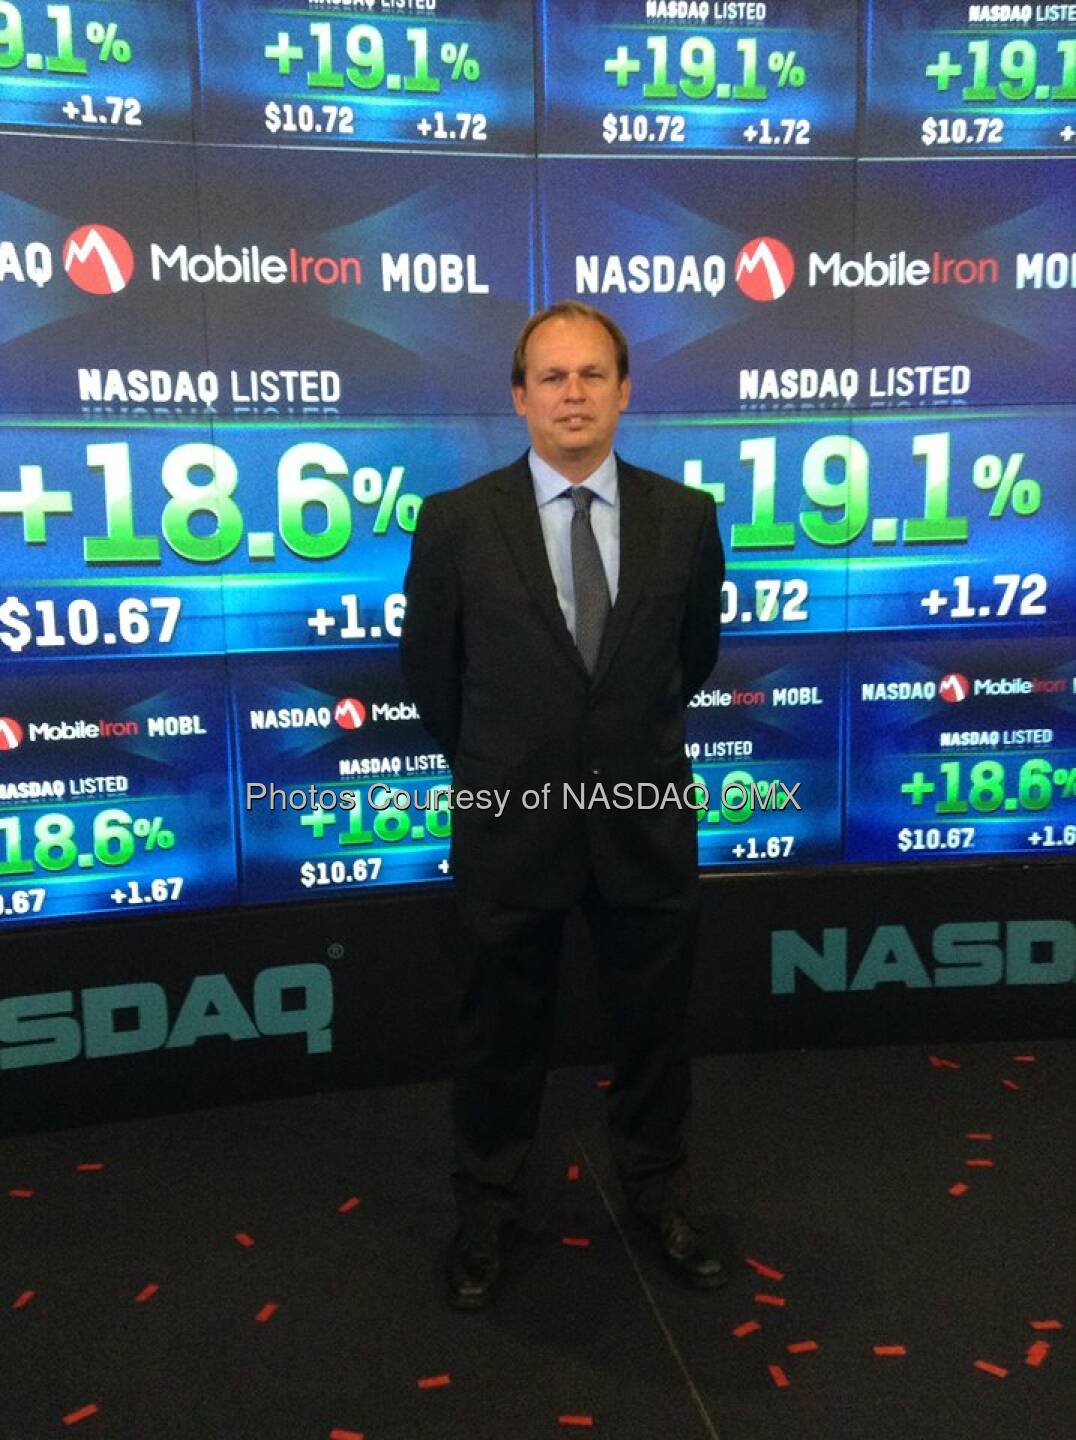 Stephan was MobileIron's very first customer! He's at Nasdaq in celebration of IPO Source: http://facebook.com/NASDAQ